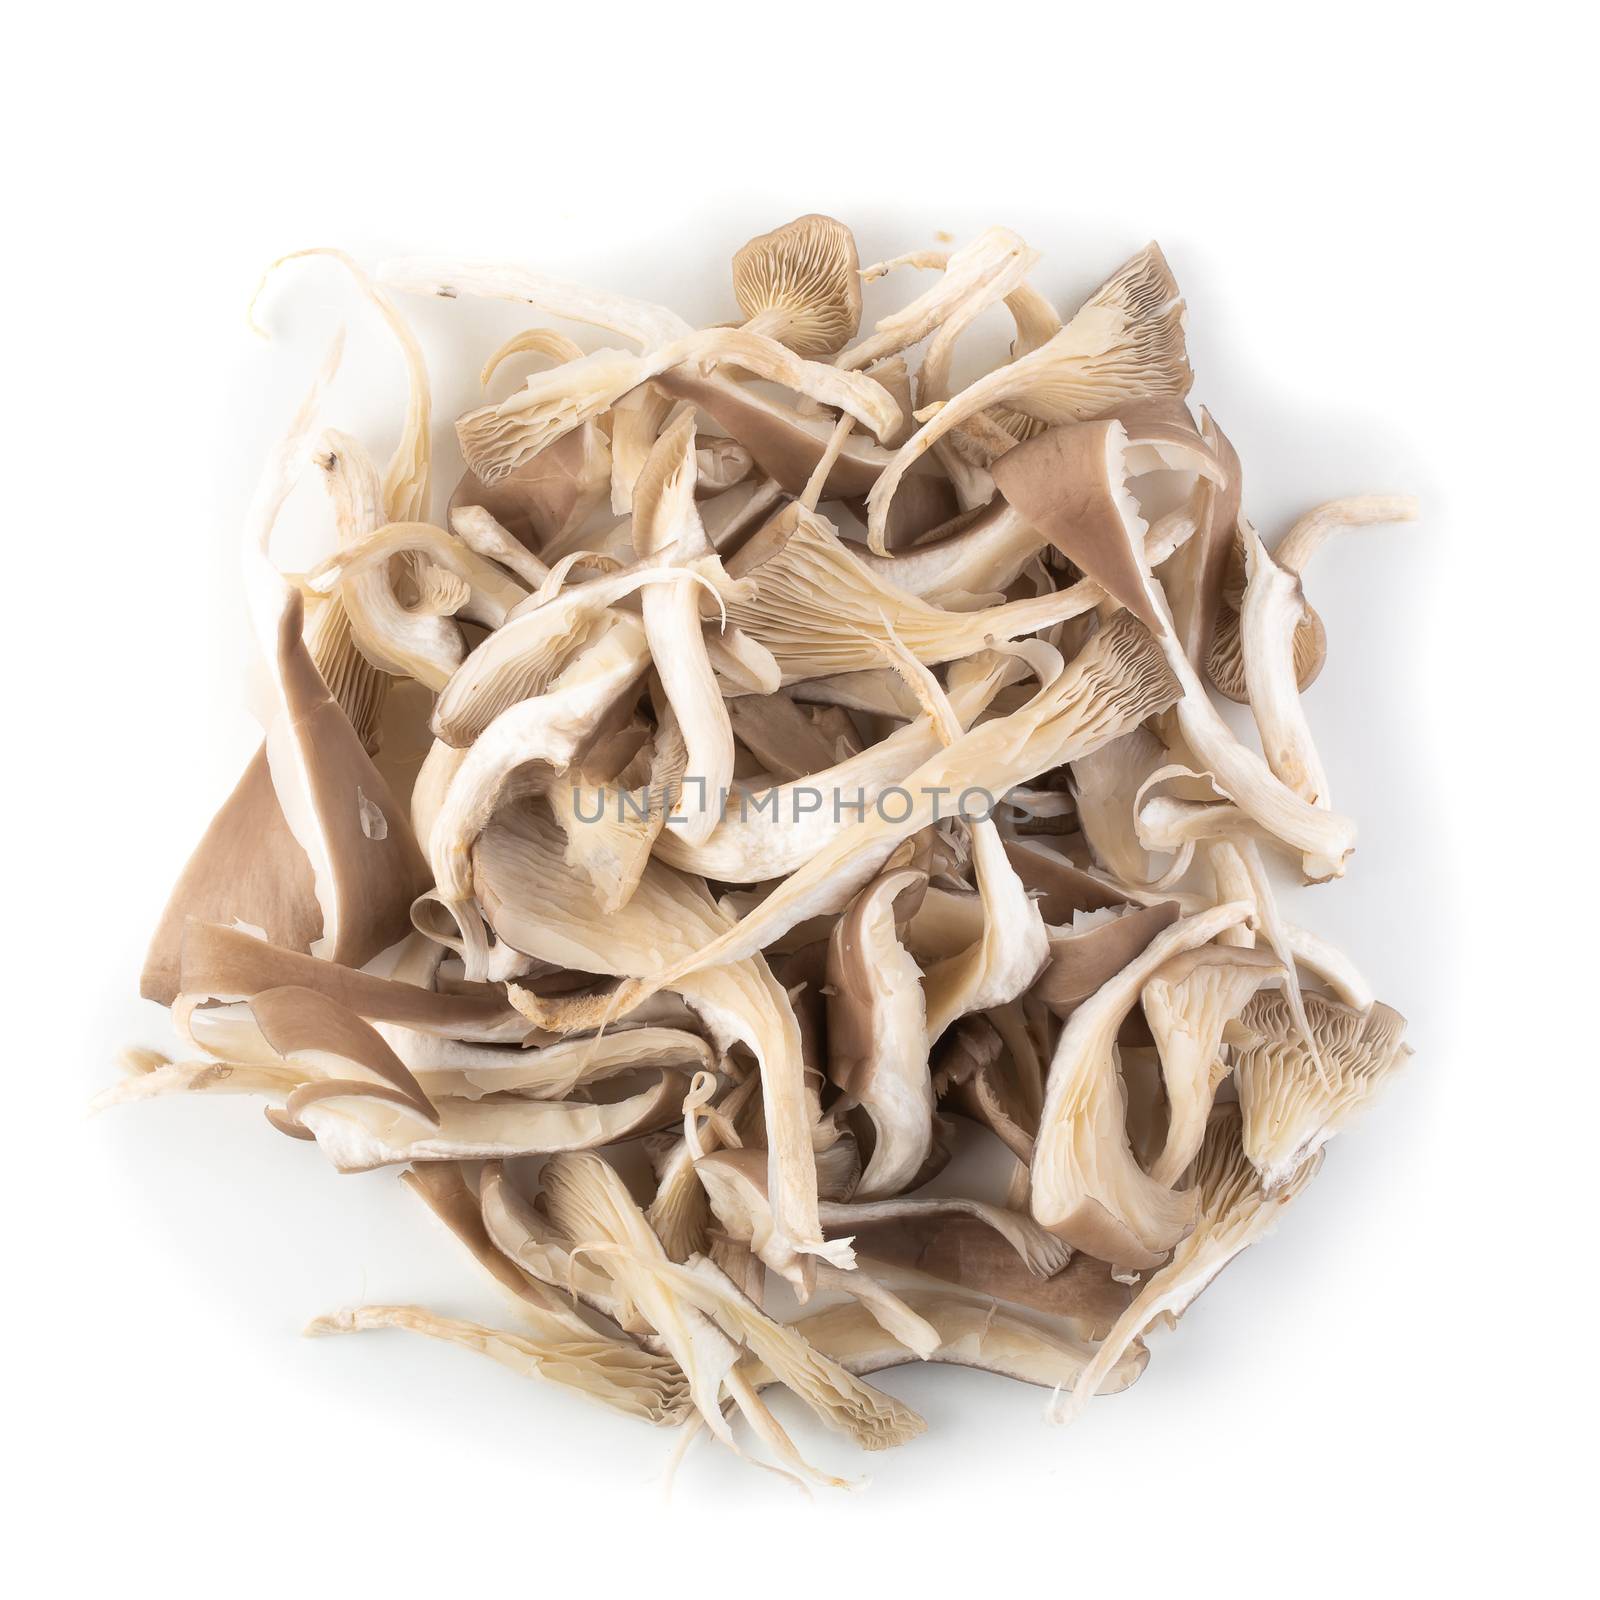 Oyster mushrooms torn apart isolated on a white background